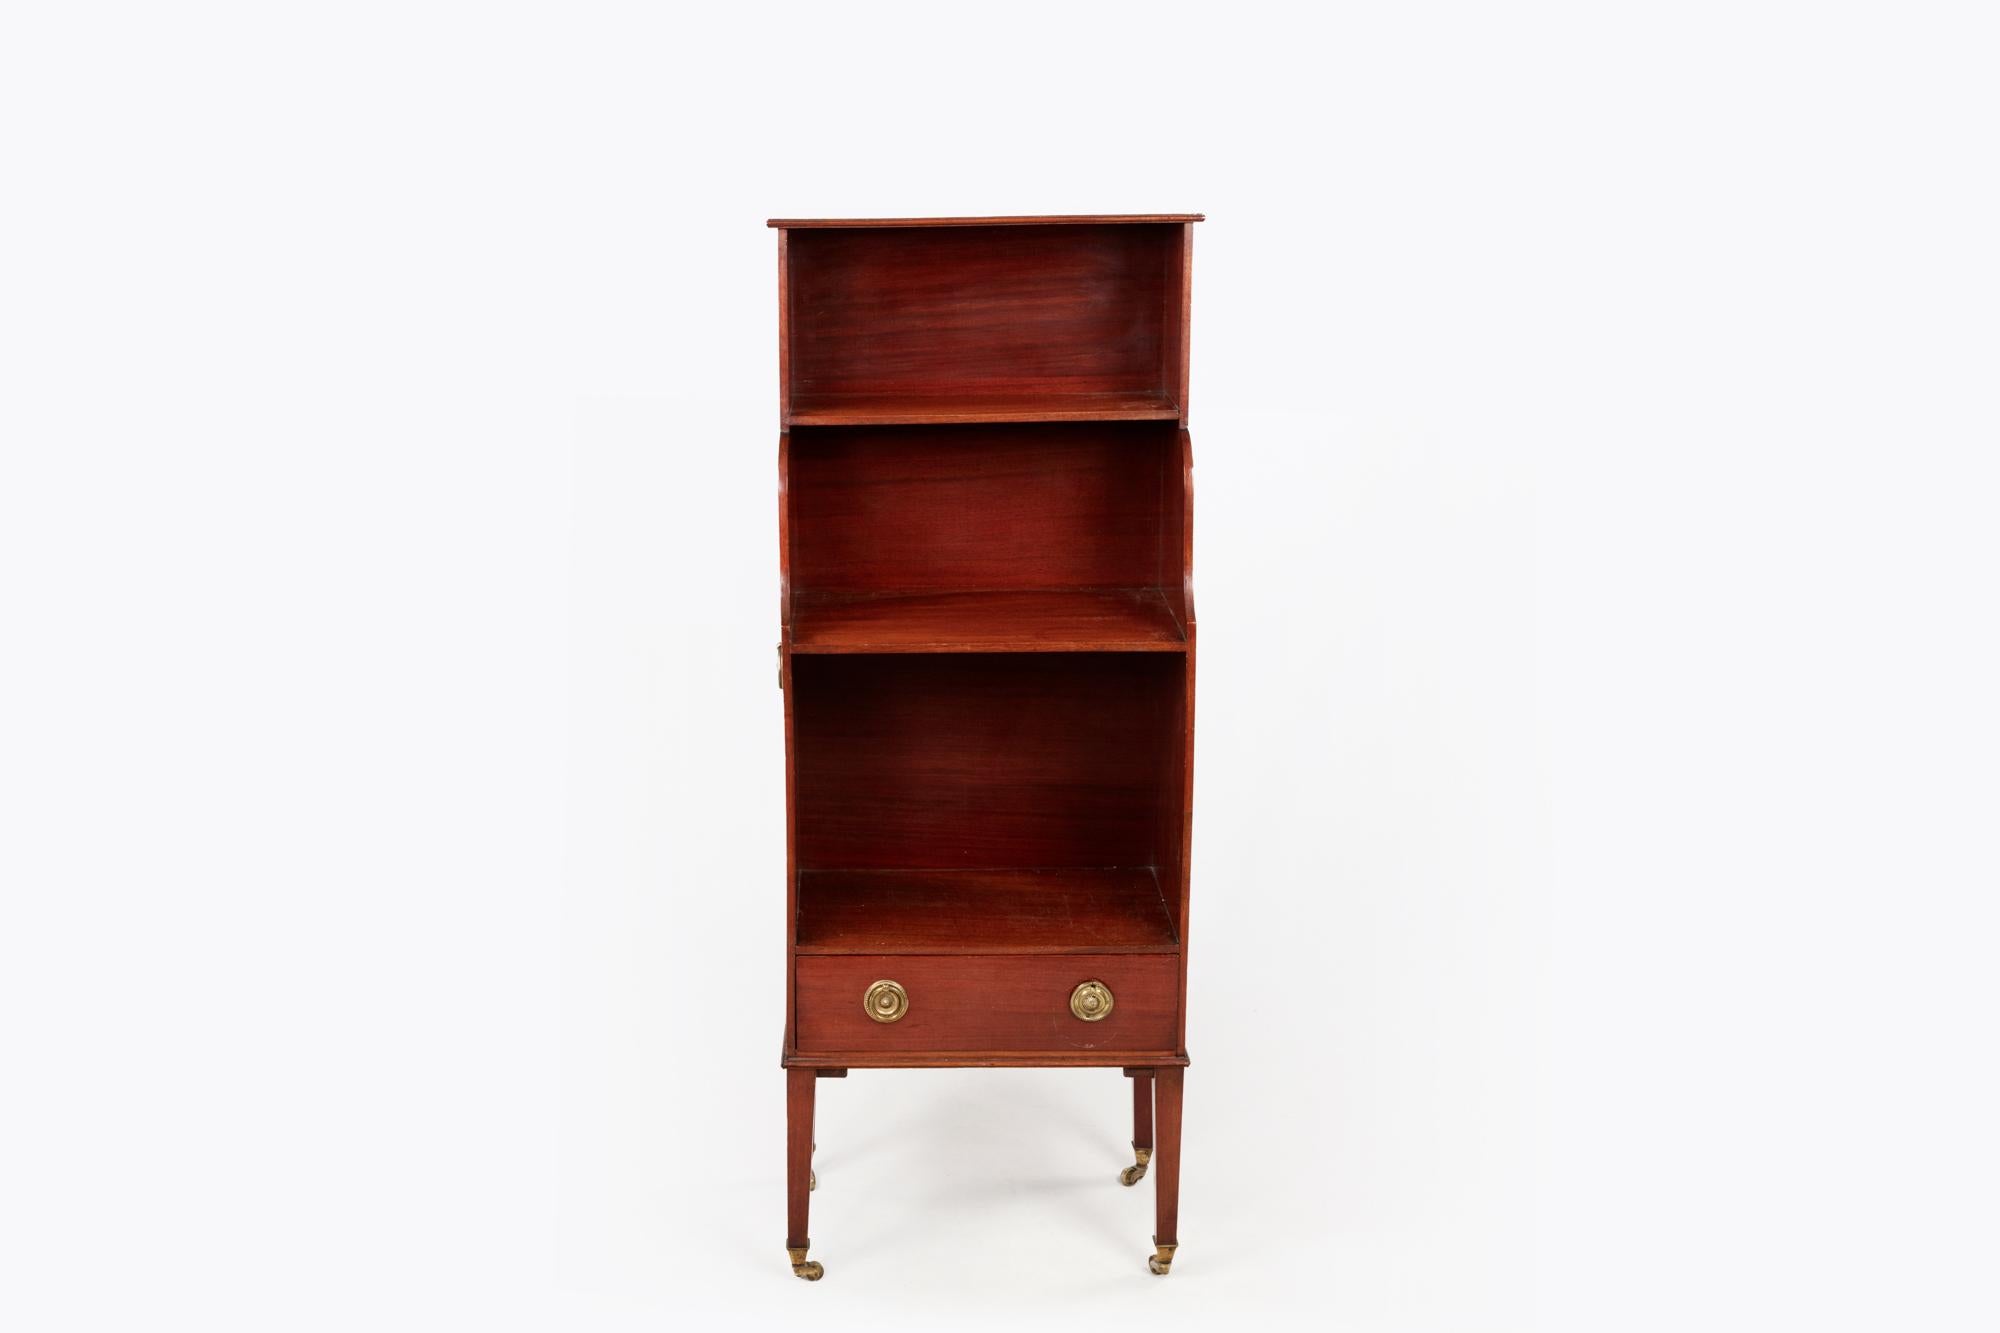 Pair of miniature mahogany Regency era waterfall bookcases with brass castor feet, brass handles, two graduated shelves & single drawers below.